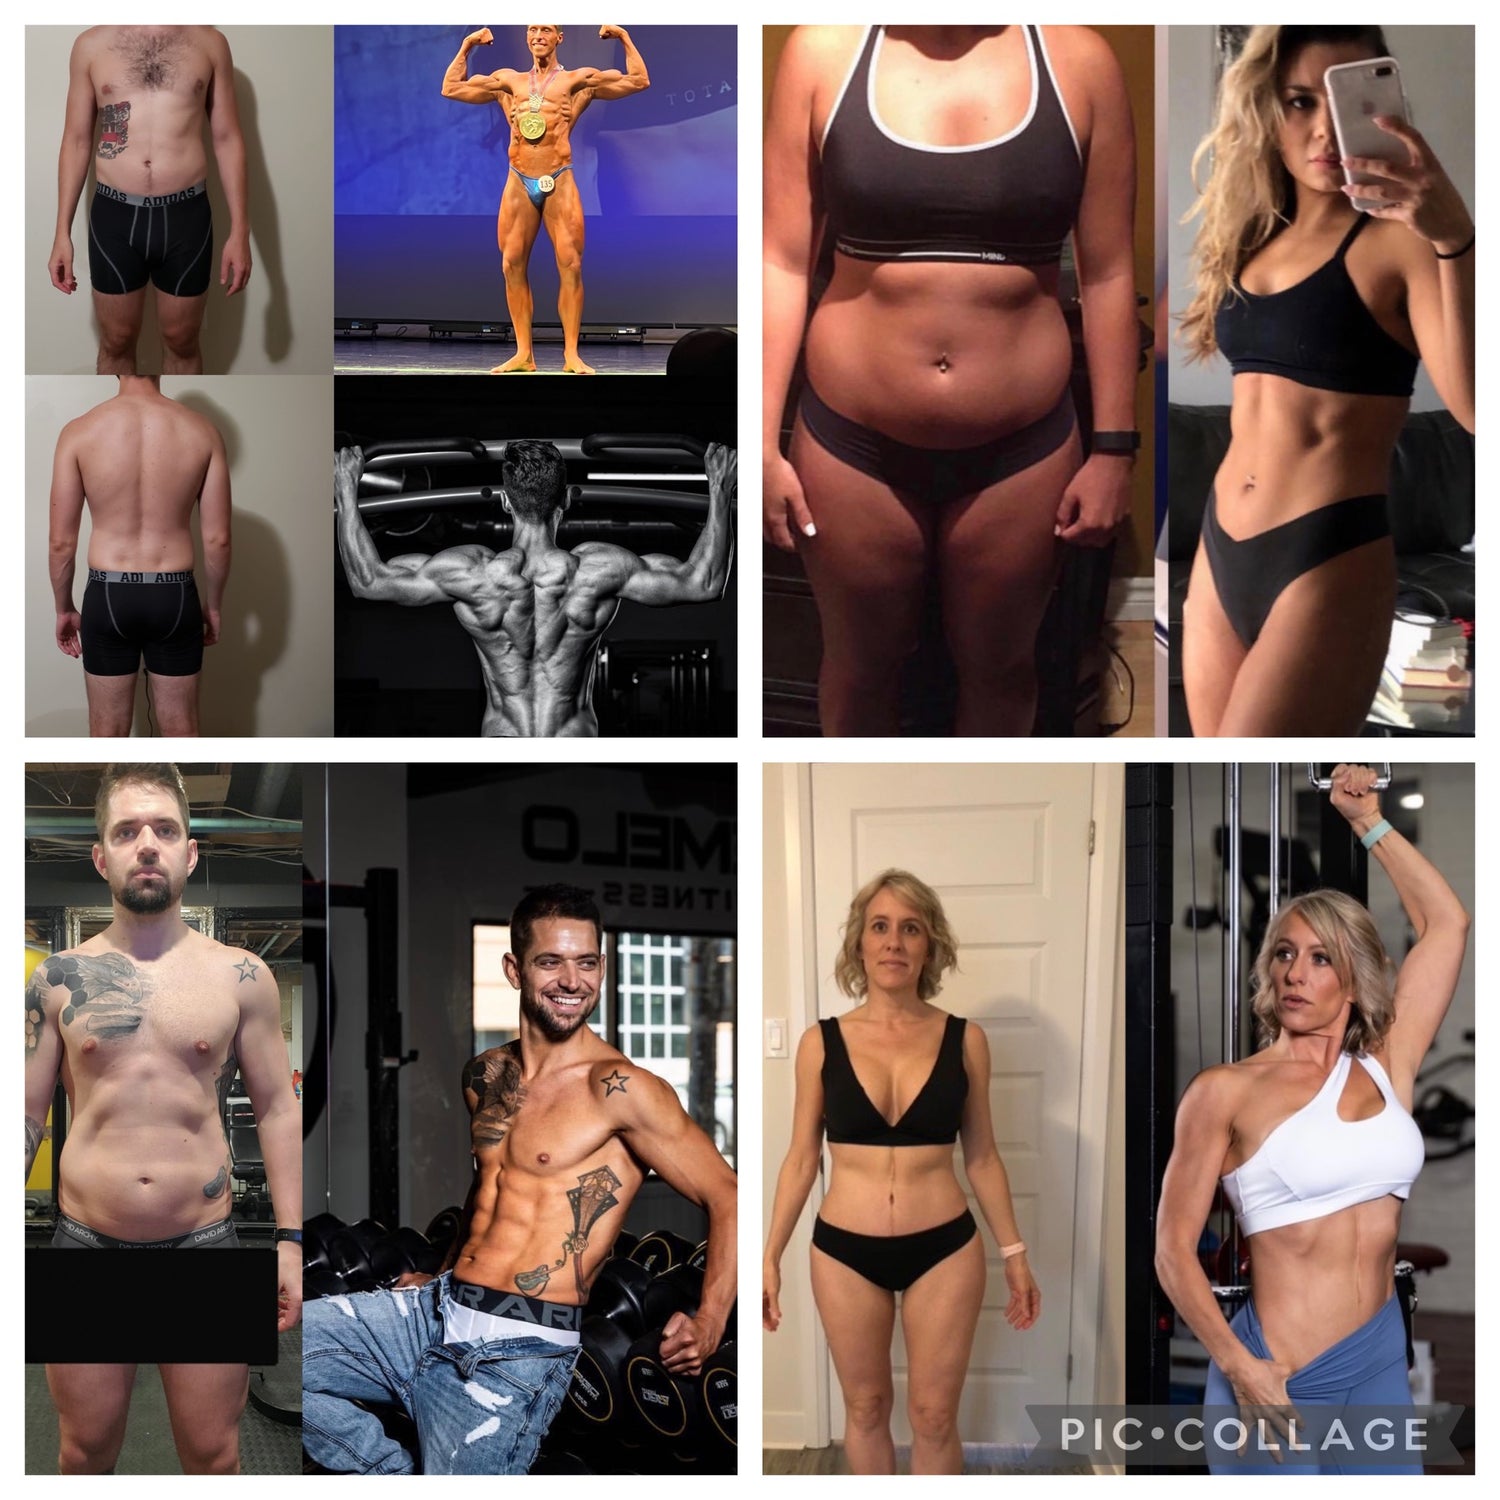 Compilation of two women and three men who have all gone through health and body improvements at the DeMelo Fitness gym. All are confidently posing showing their figures. One male is participating in a body building show.